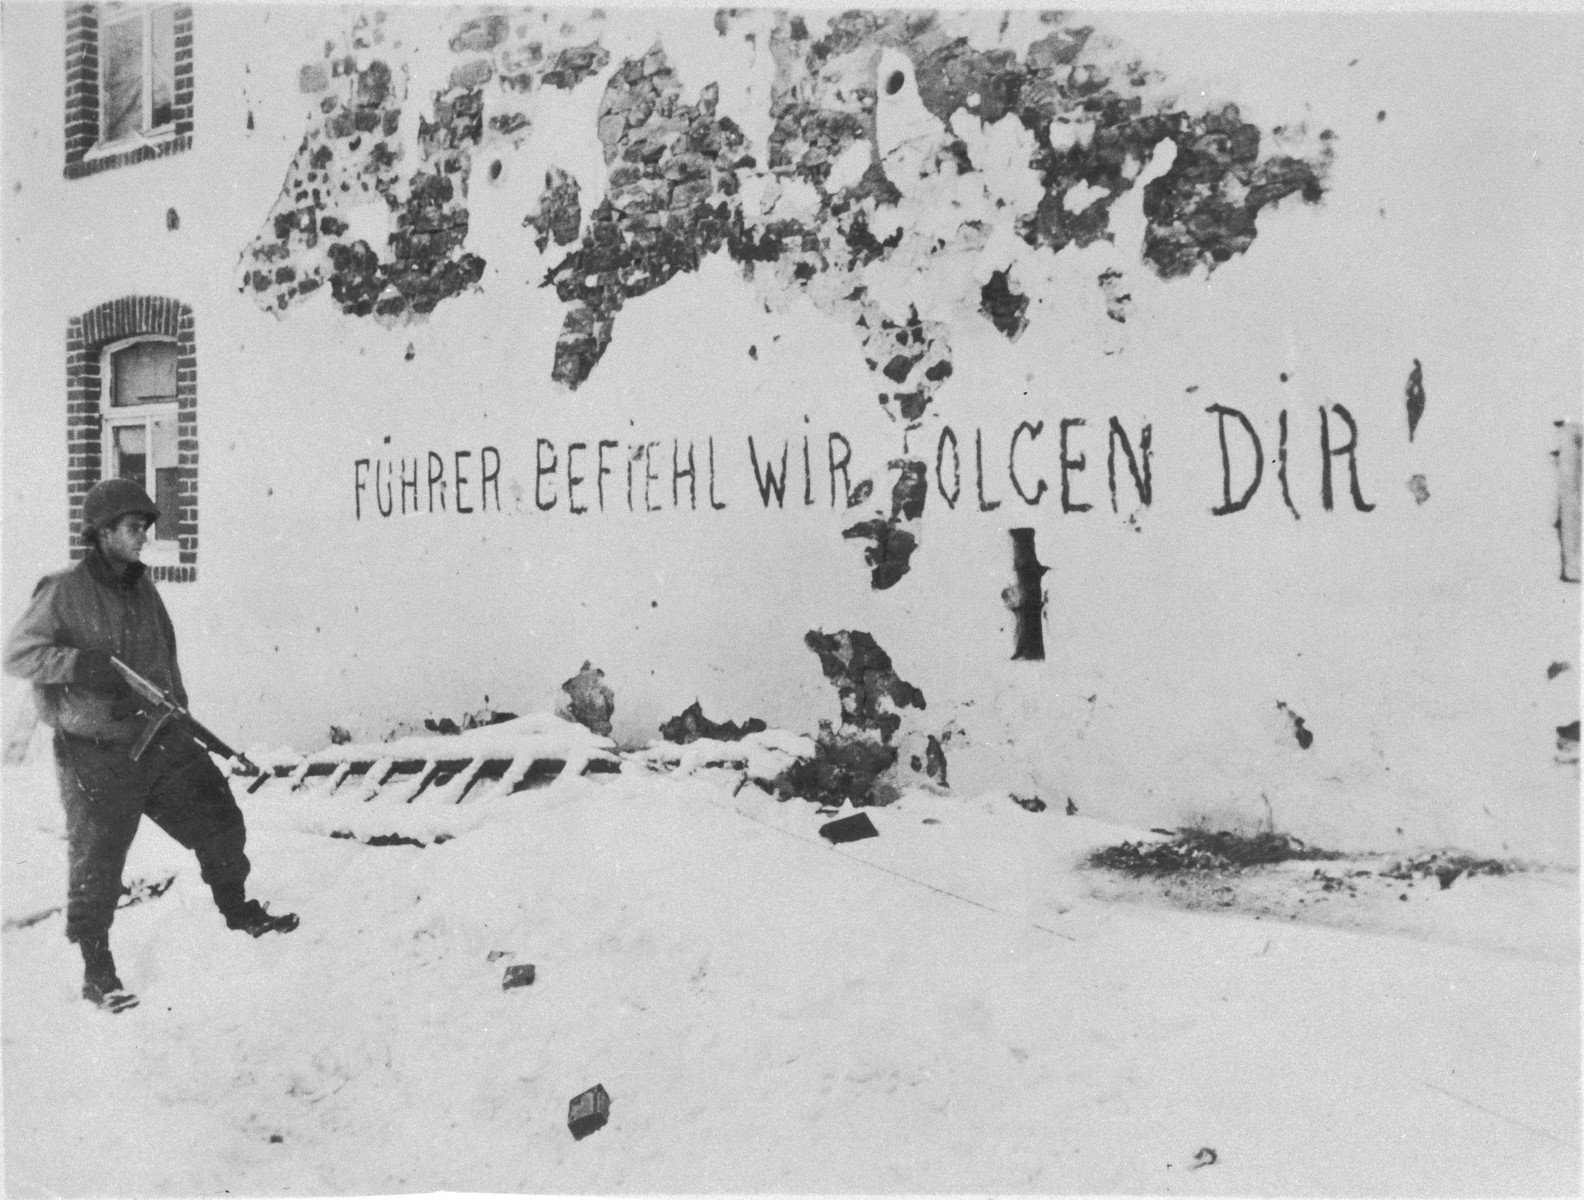 An American soldier views a German slogan scrawled on the side of a building which reads: "Fuehrer give the order, we will follow."